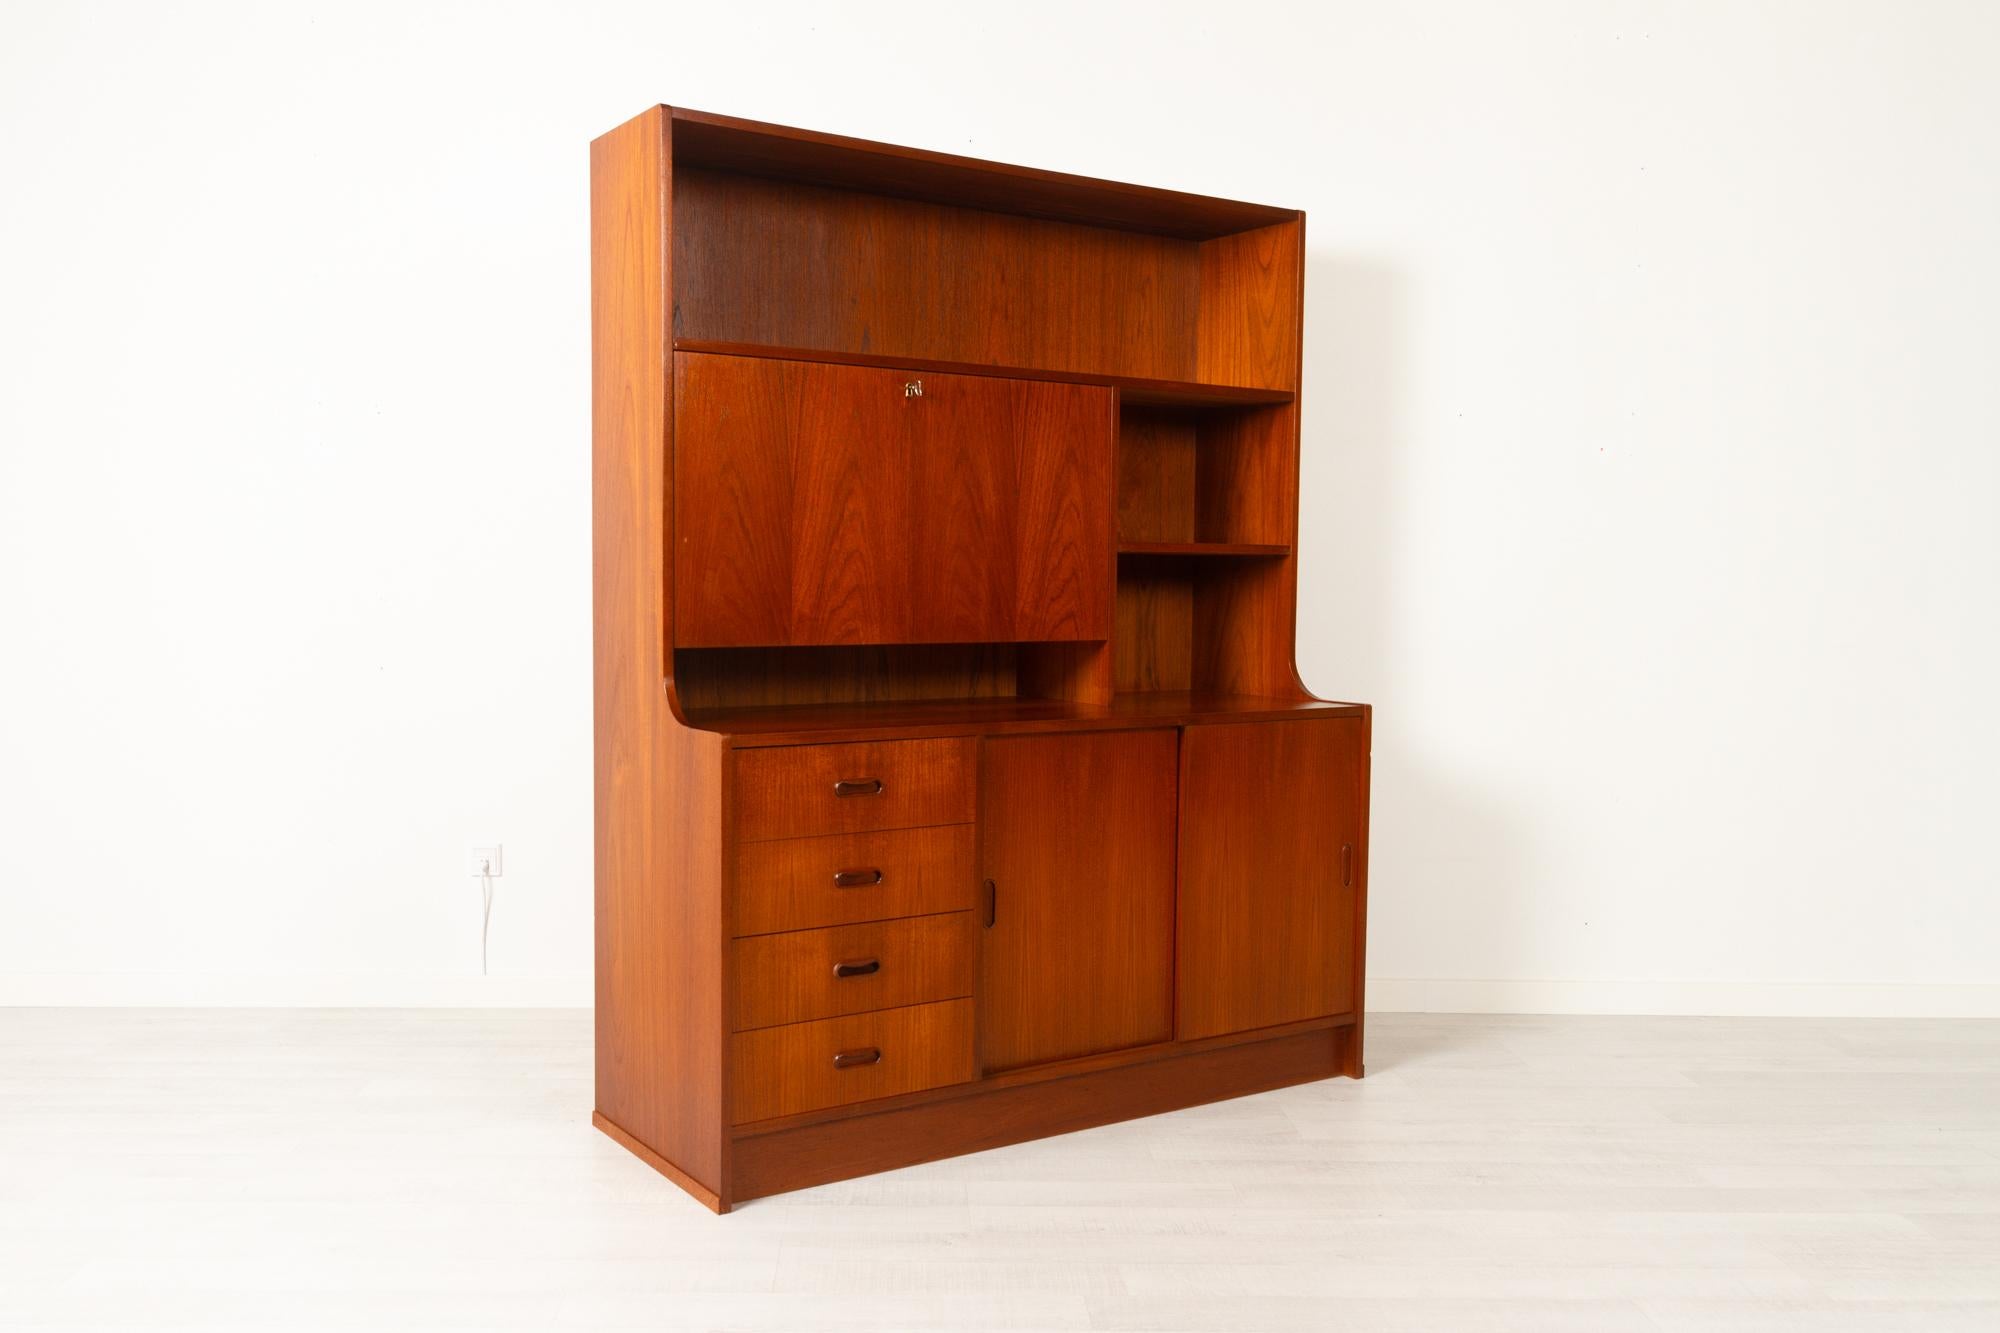 Vintage Danish teak bookcase 1960s
Classic Danish Mid-Century Modern wall unit in teak. Drawer section with four drawers, sculpted pulls in solid teak. Large cabinet with double sliding doors. Bar cabinet with lockable drop down door and one shelf.